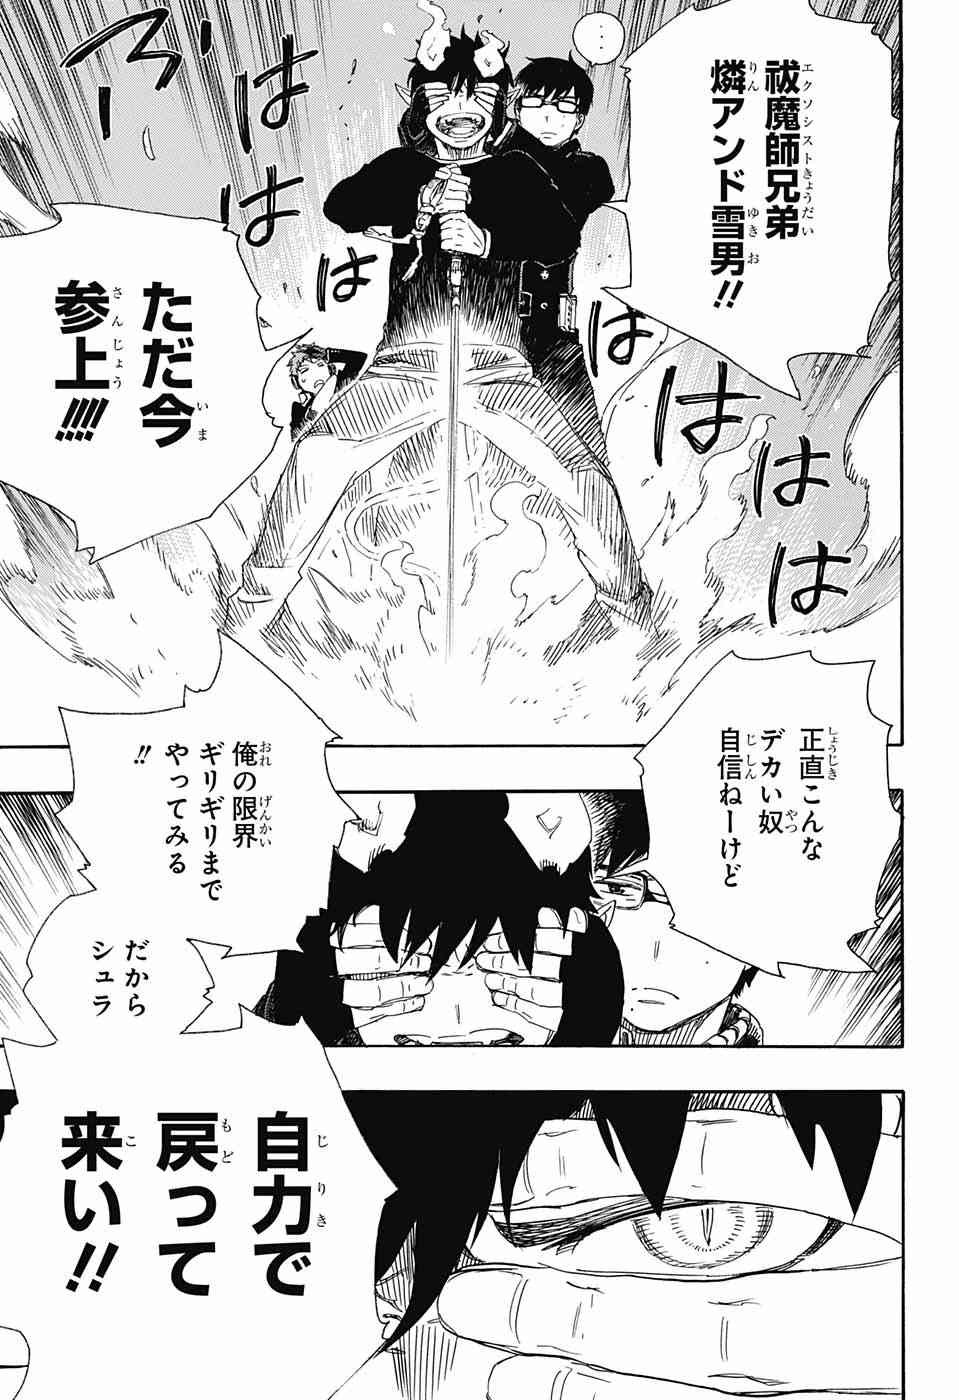 Ao no Exorcist - Chapter 78 - Page 31